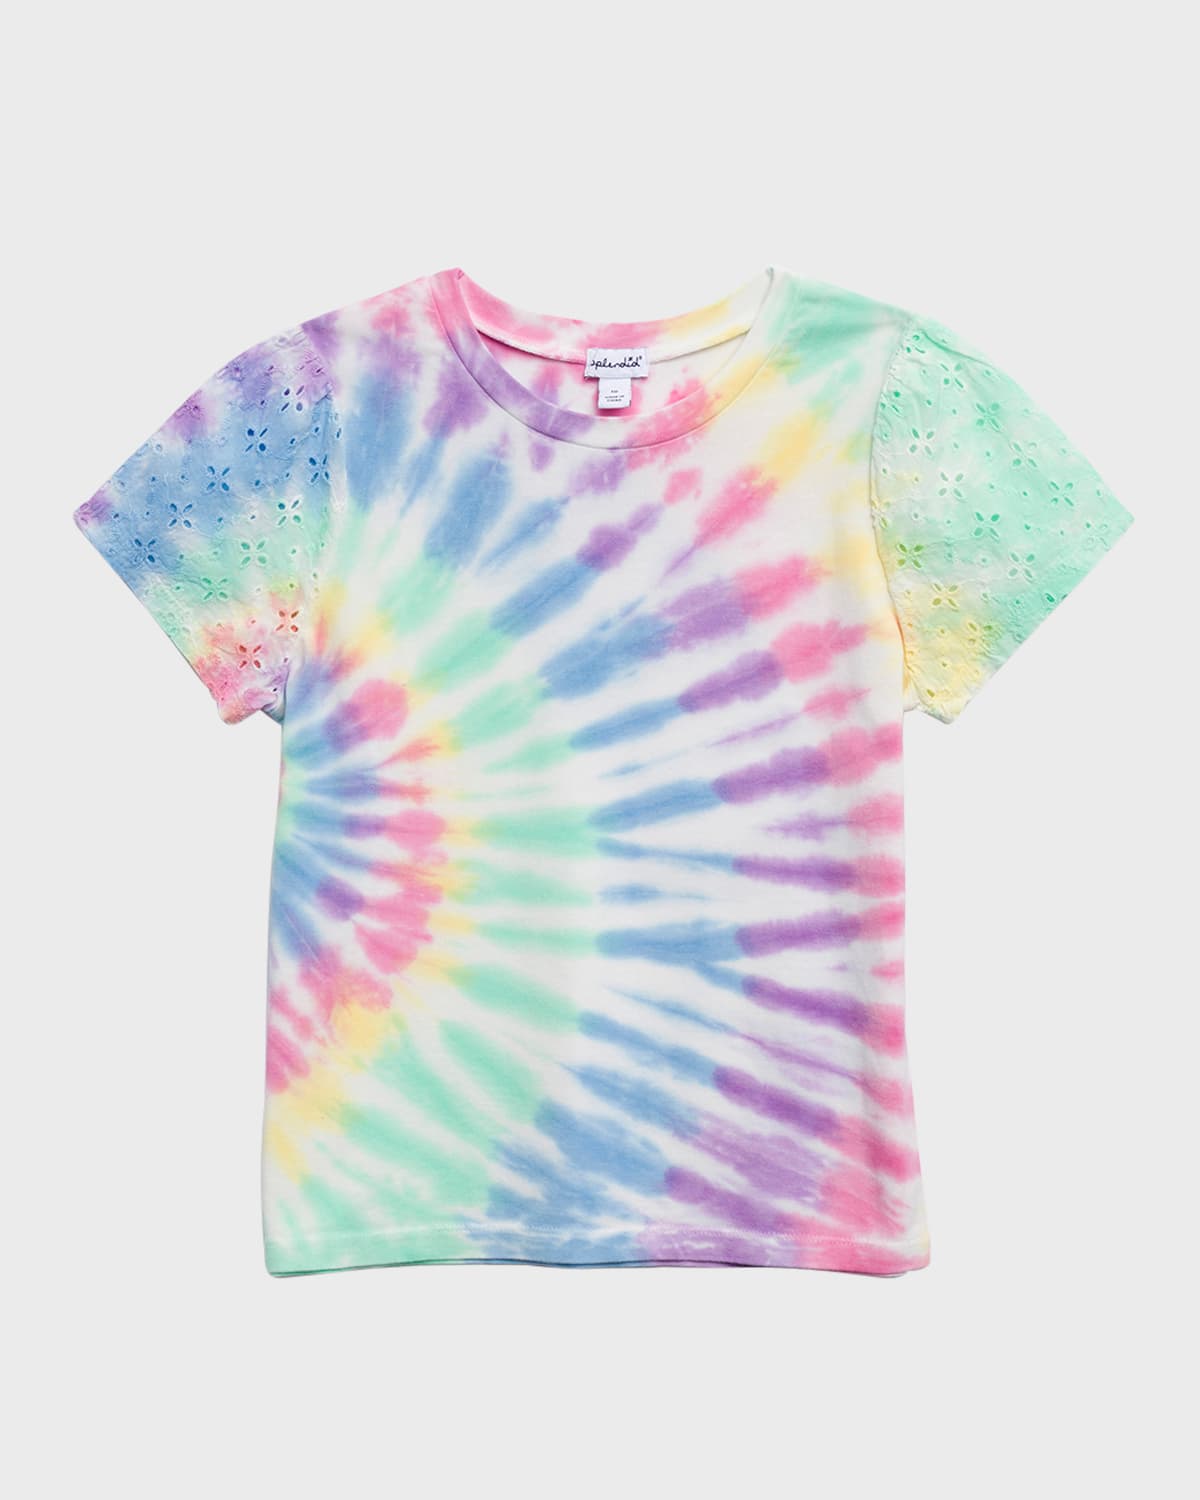 Girl's Embroidered Eyelet Rainbow Tie Dye-Print T-Shirt, Size 7-14